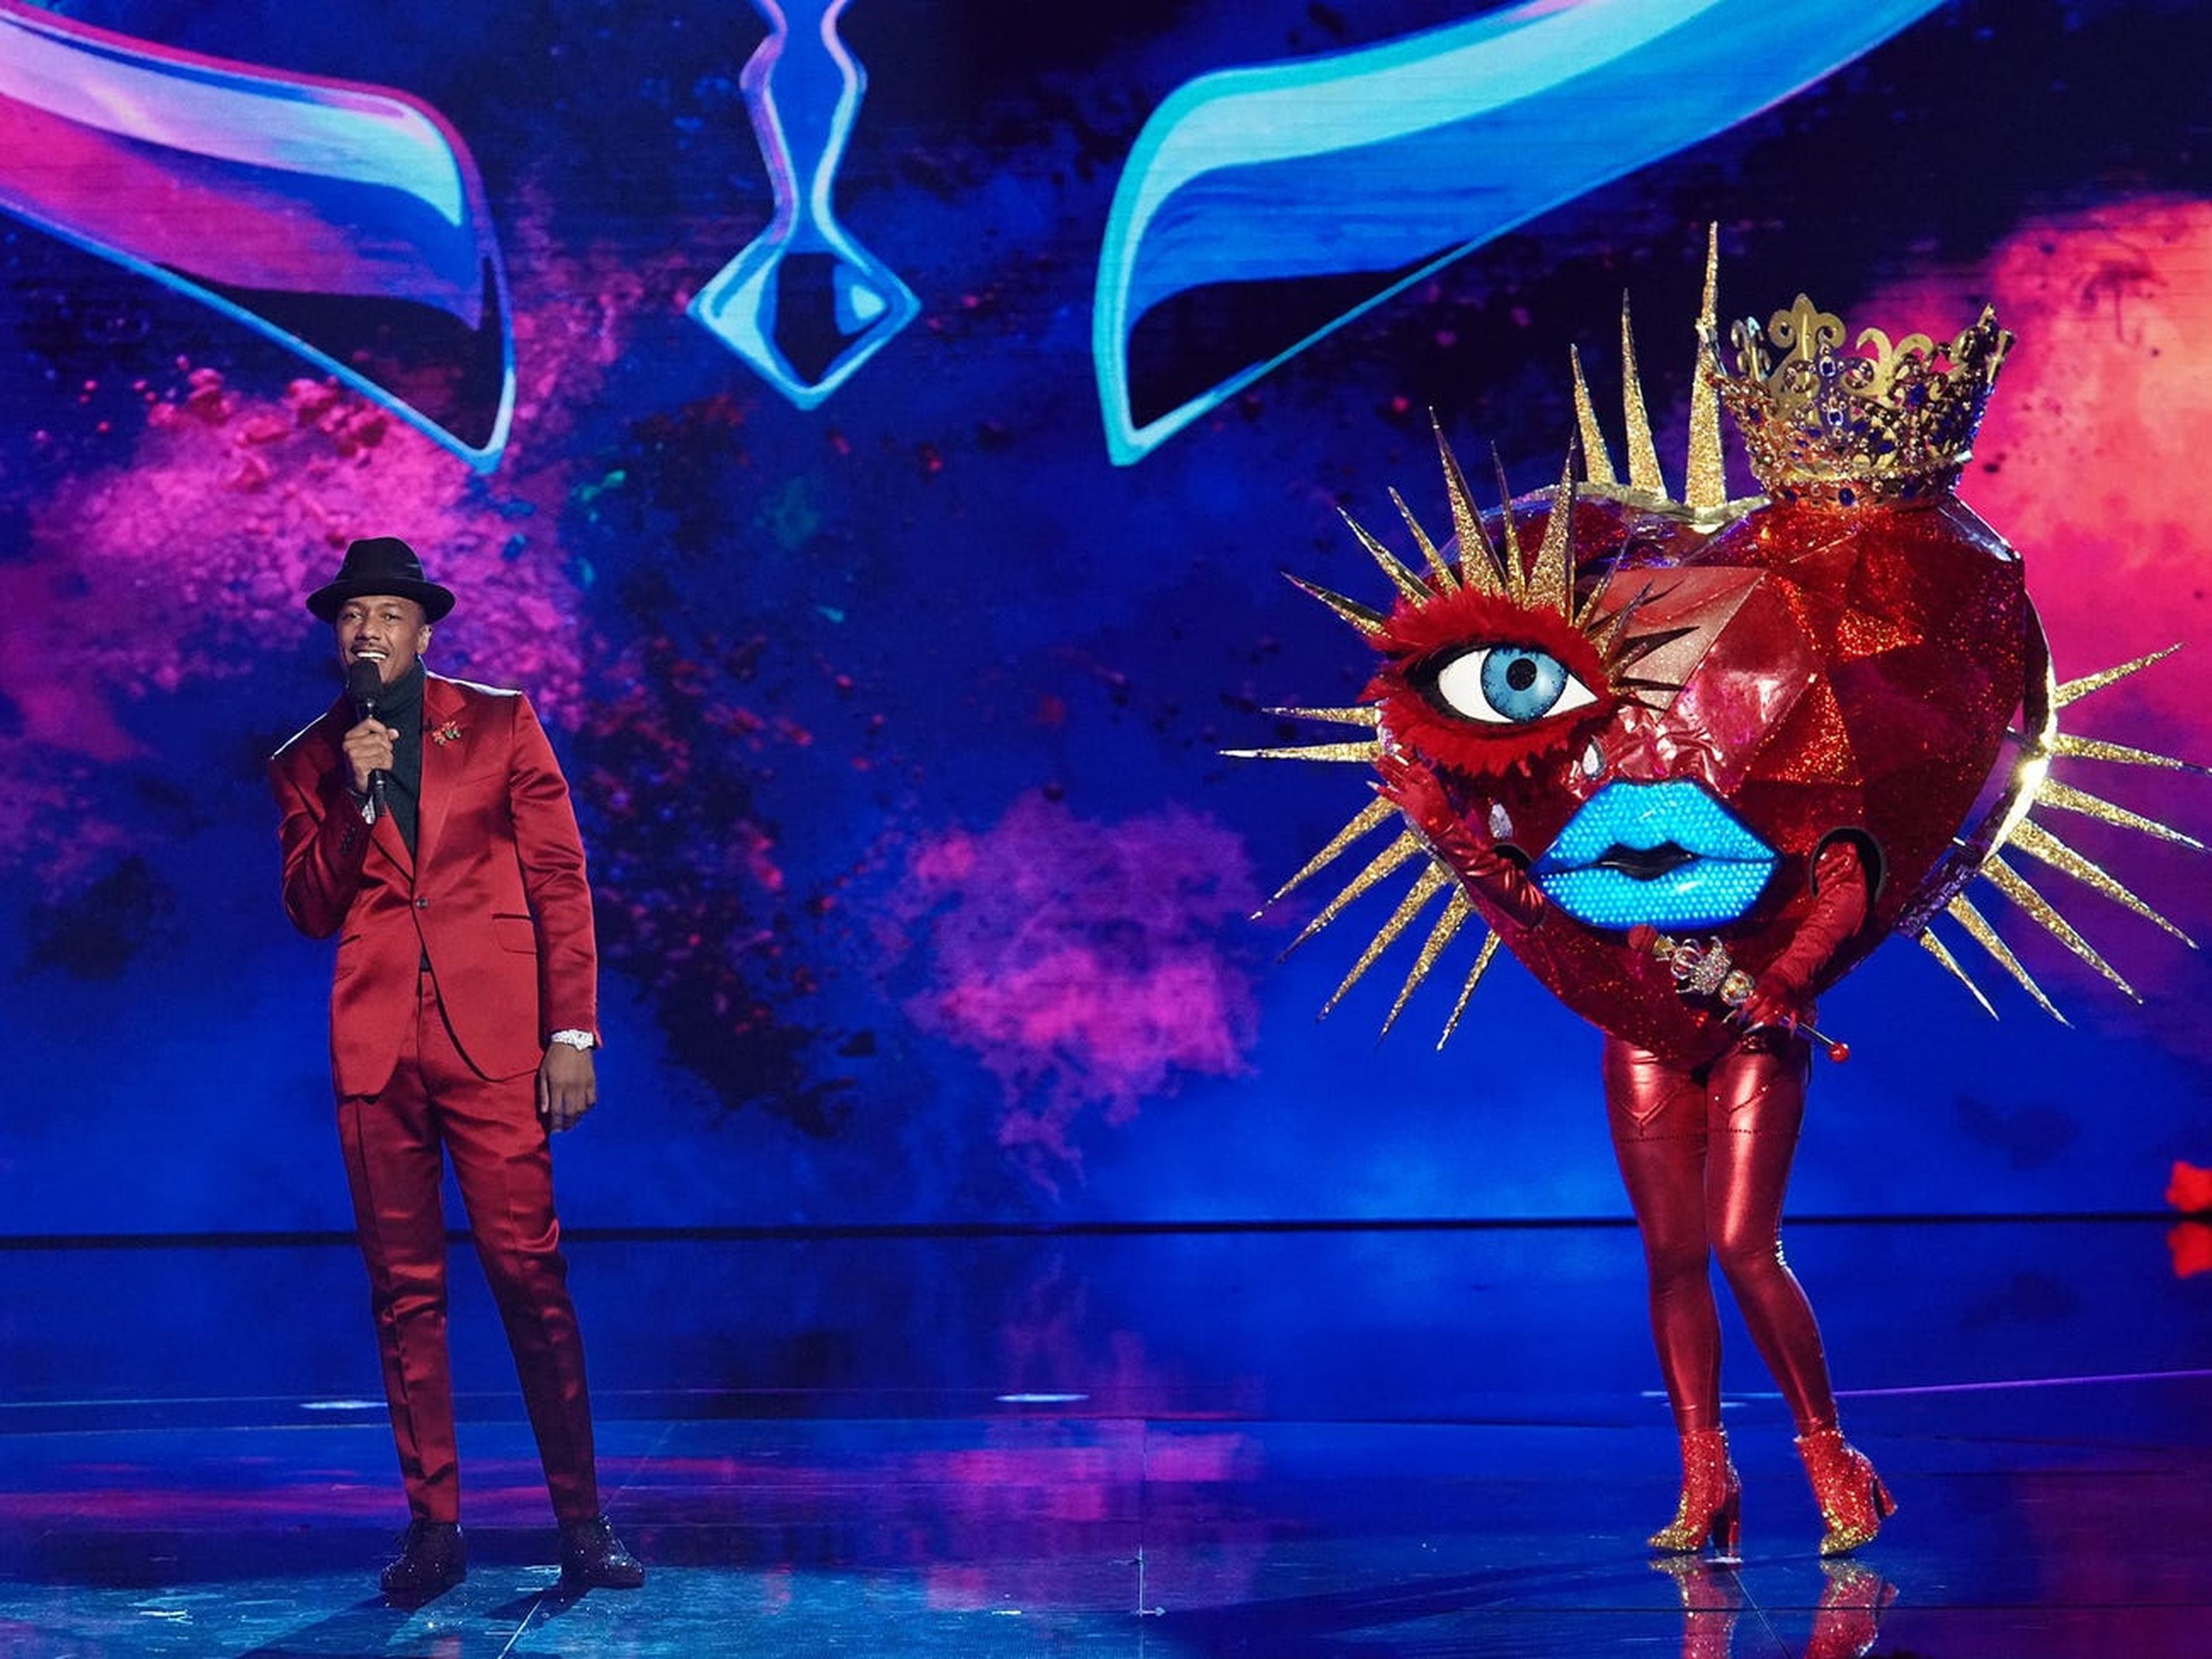 Fox released 10,000 "Miss Masky" NFTs tied to its hit "The Masked Singer" as it hopes fans will engage with the "Maskverse" platform